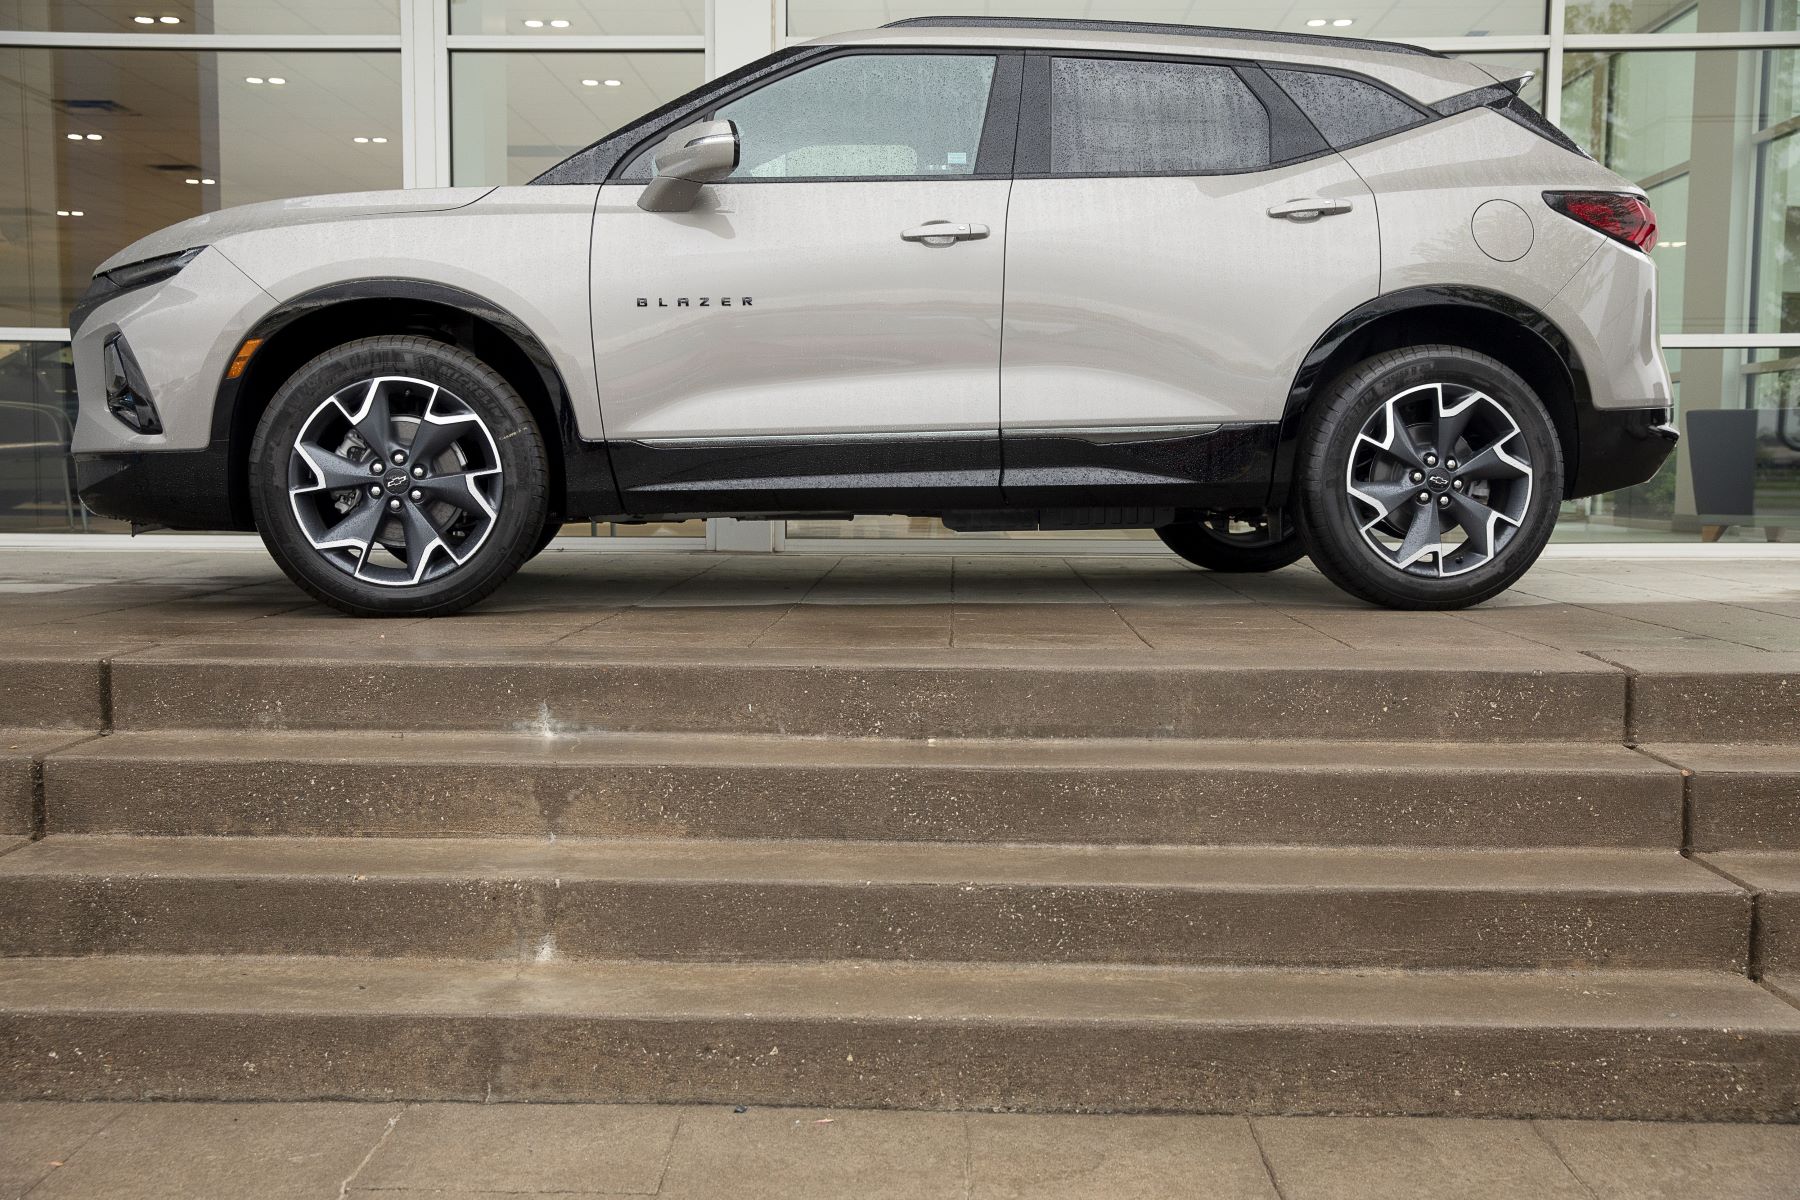 A 2021 Chevy Blazer compact crossover SUV model at the Green Chevrolet dealership in East Moline, Illinois